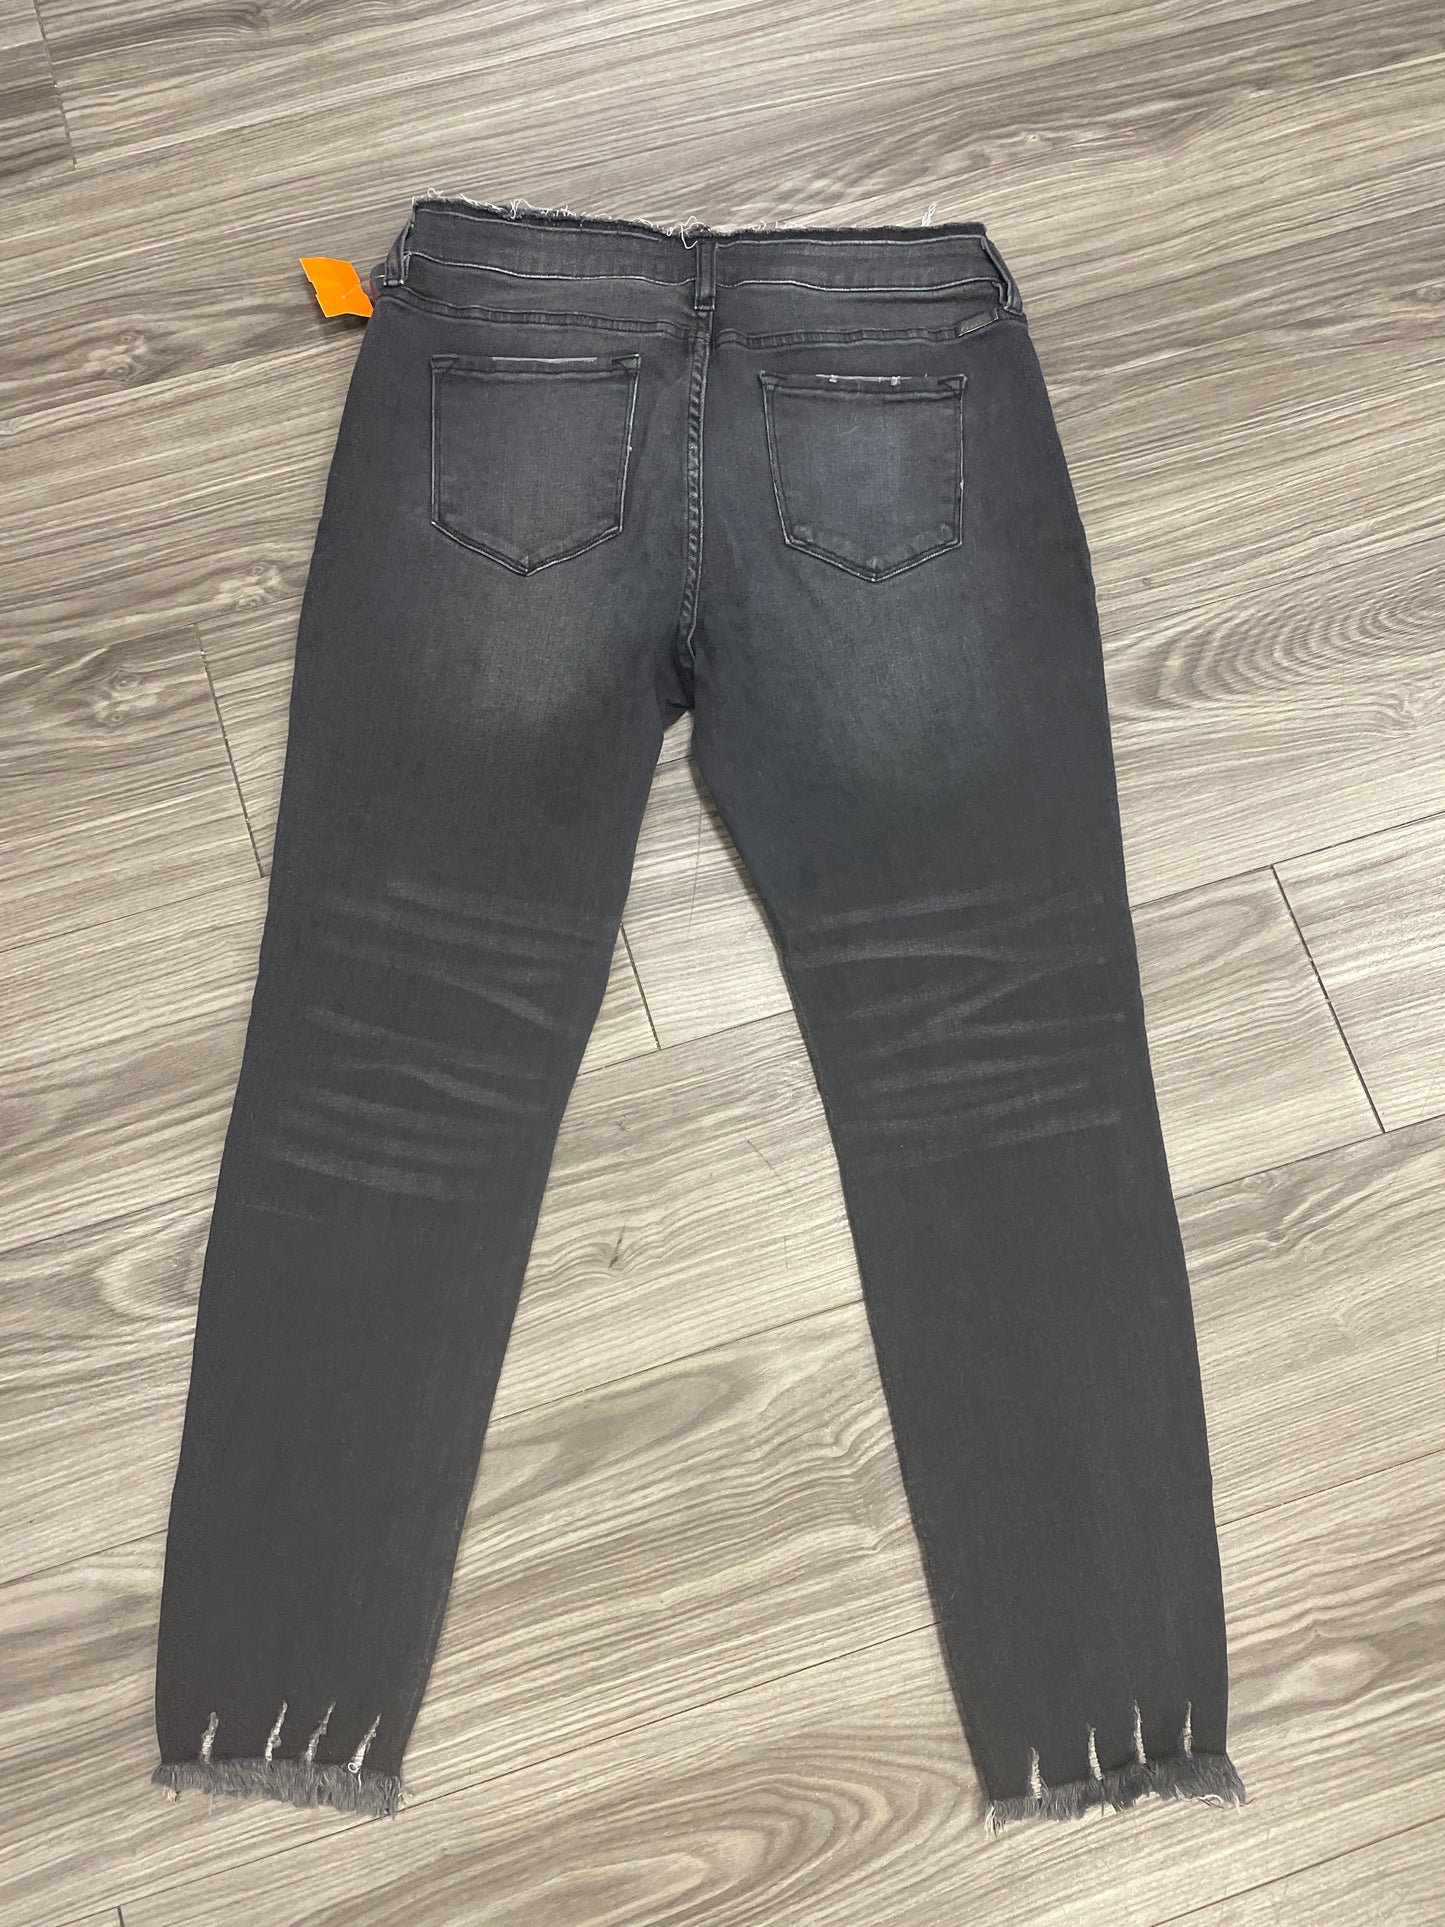 Jeans Skinny By Kancan  Size: 31